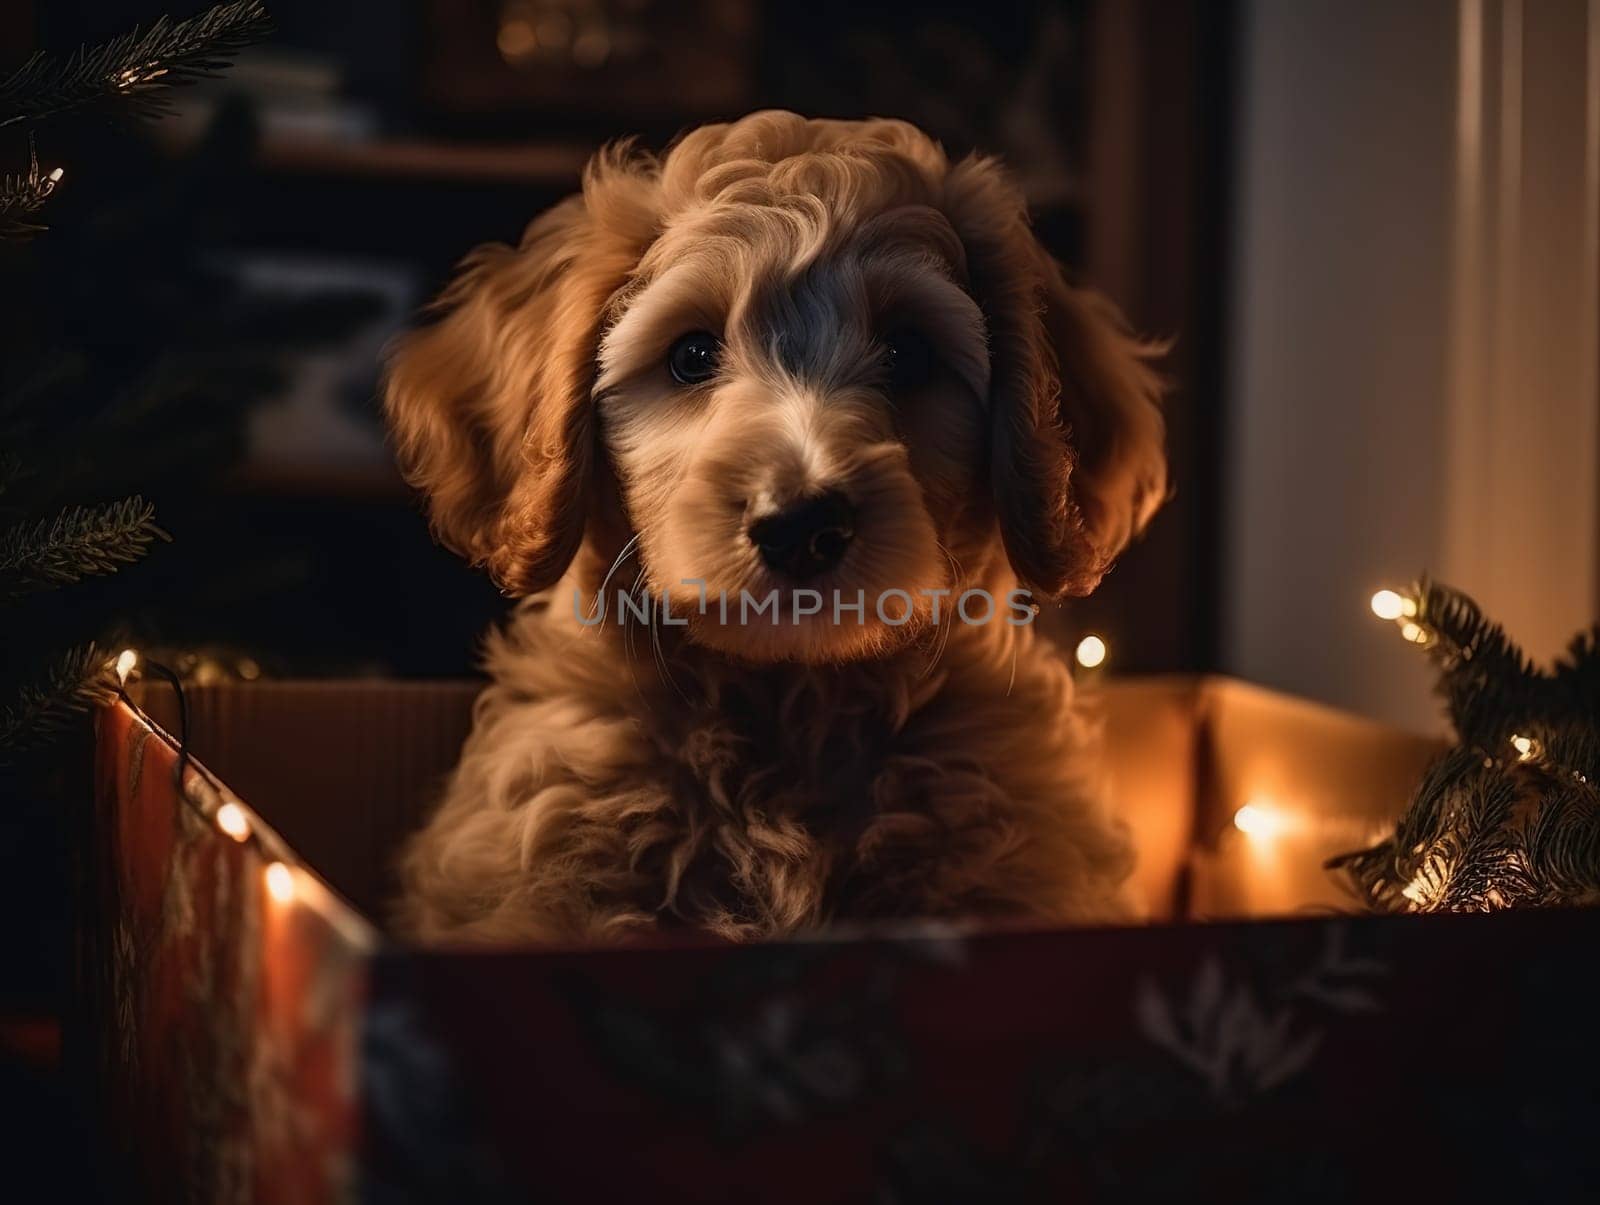 Puppy Sits In Box As New Year Gift Under Christmas Tree by GekaSkr